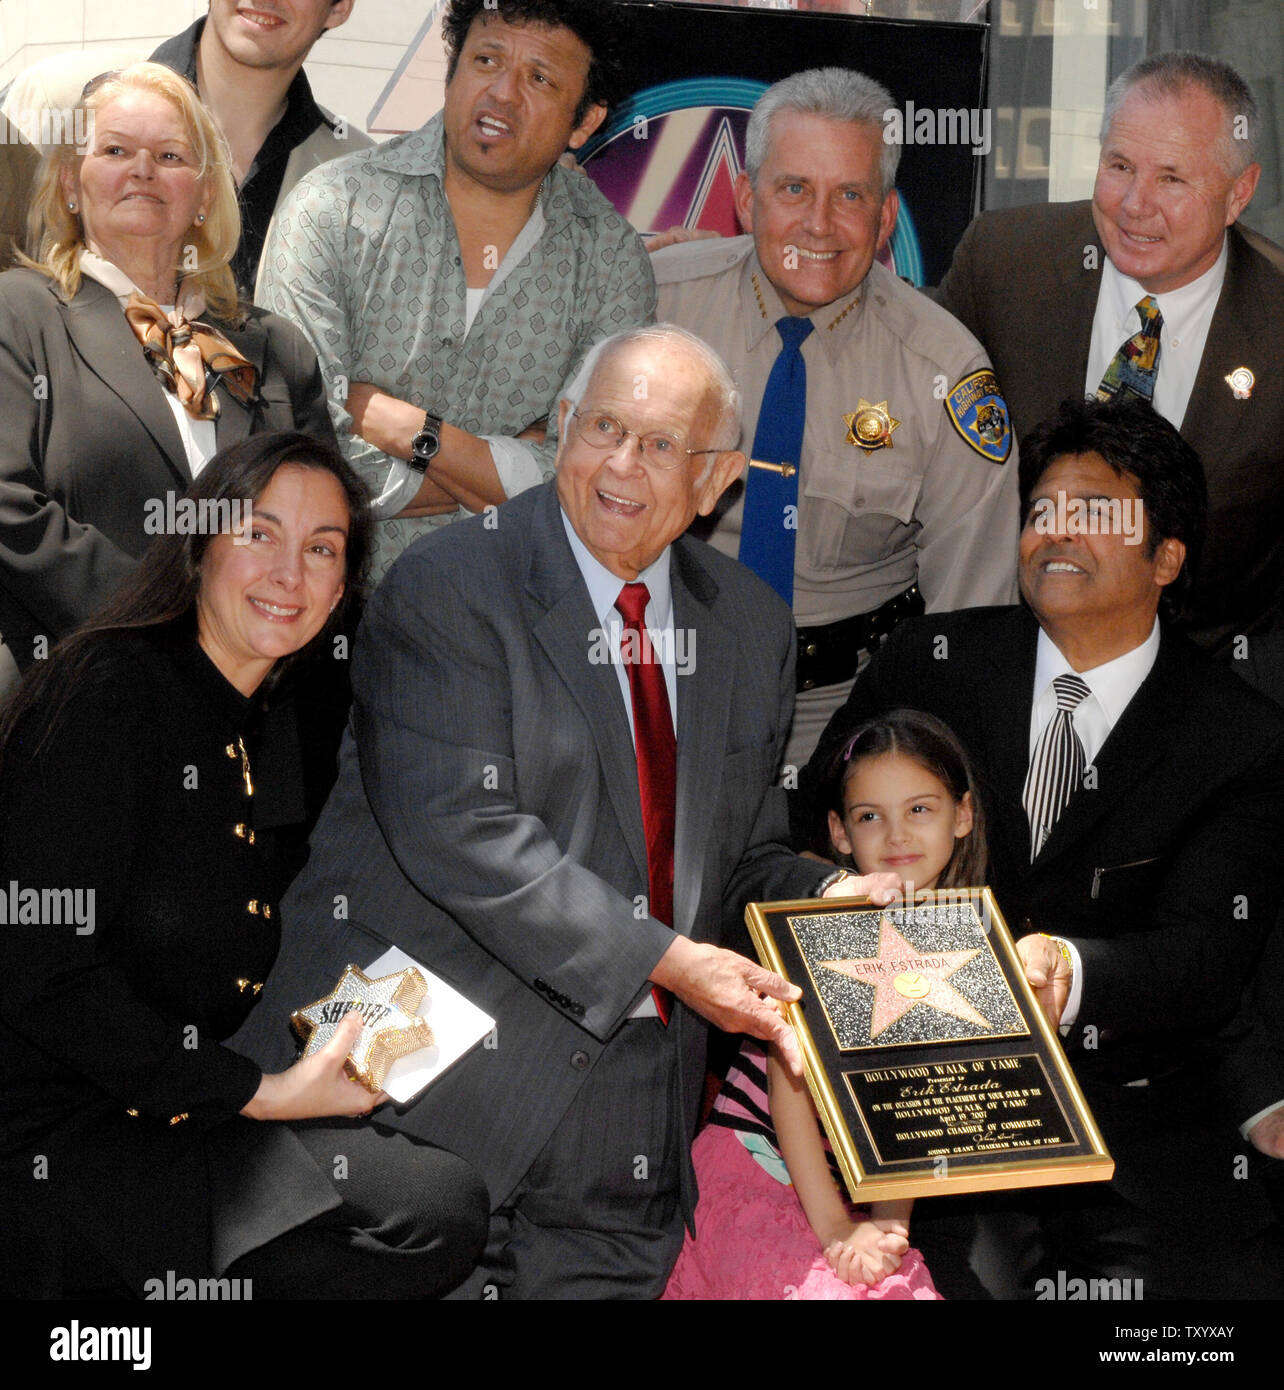 Actor Erik Estrada, lower right, best known for his role as Officer Frank 'Ponch' Poncherello in the 1977-1983 television series 'CHiPS' poses with young daughter Francesca, his mother Carmen and wife Nanette (L) along with other unidentified supporters after his star was unveiled on the Hollywood Walk of Fame in Los Angeles on April 19, 2007. (UPI Photo/Jim Ruymen) Stock Photo